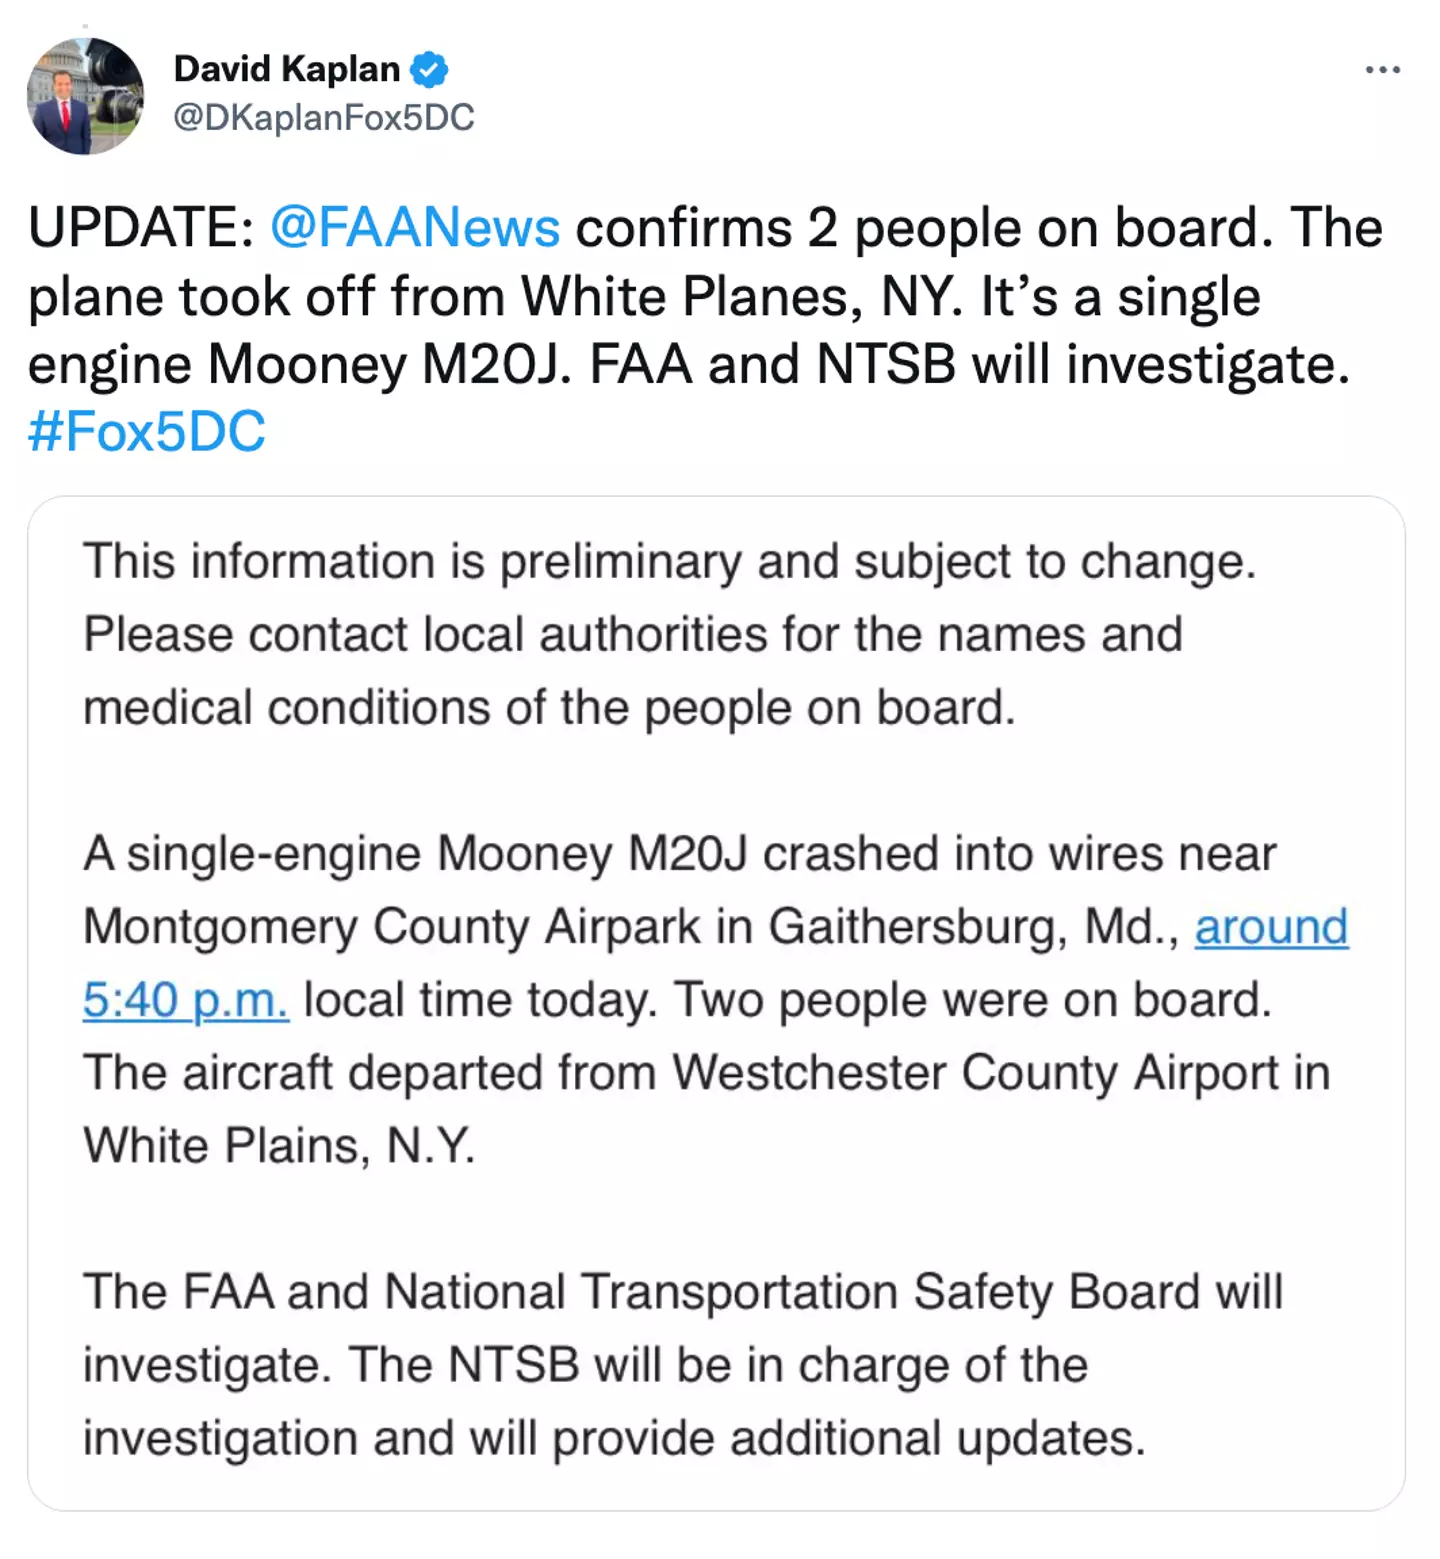 The FAA confirmed the crash in a statement.